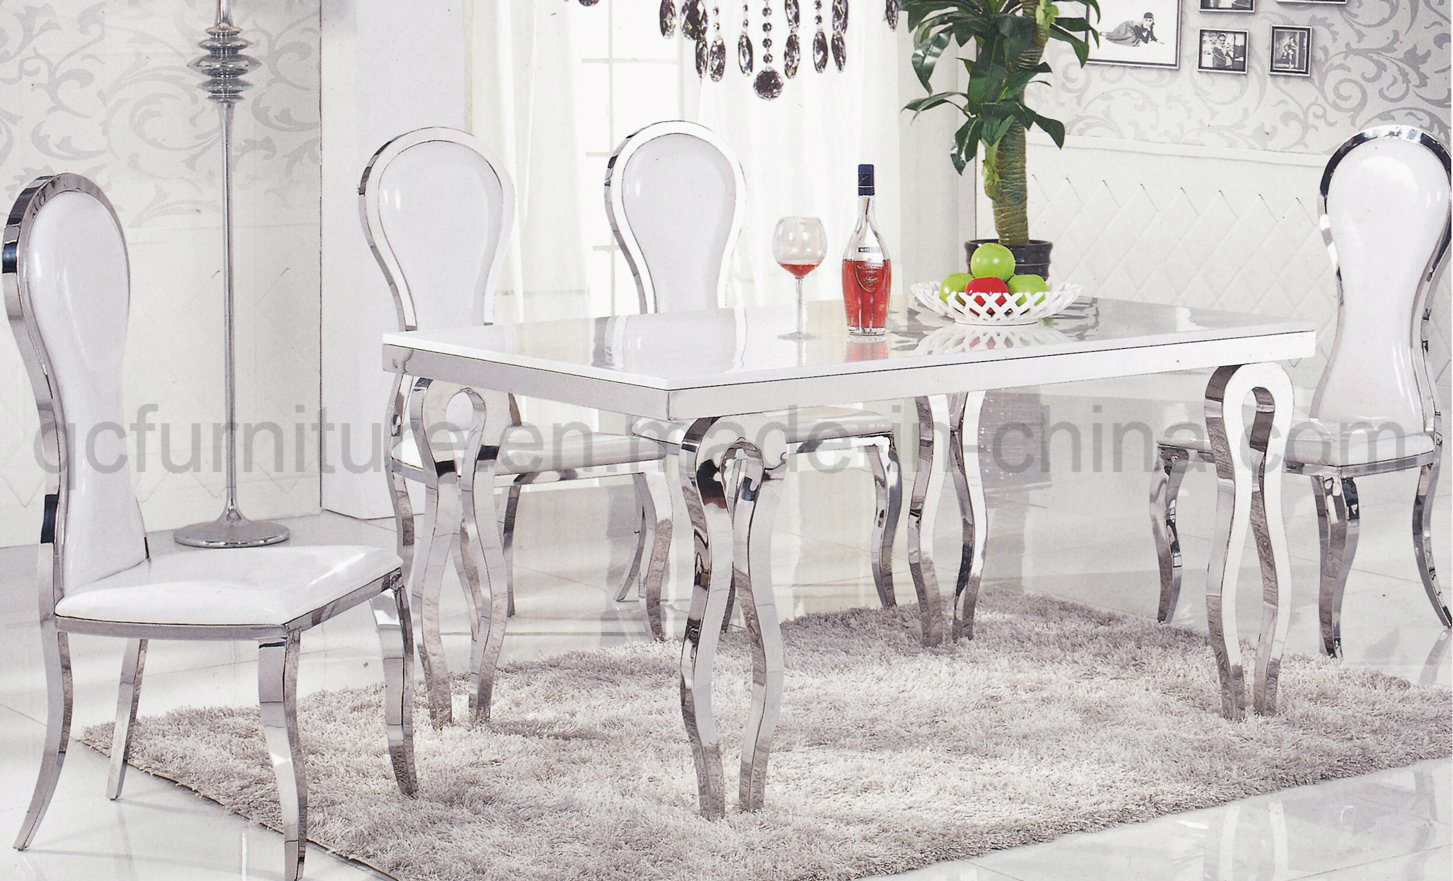 MID-East Style High Quality Dining Table